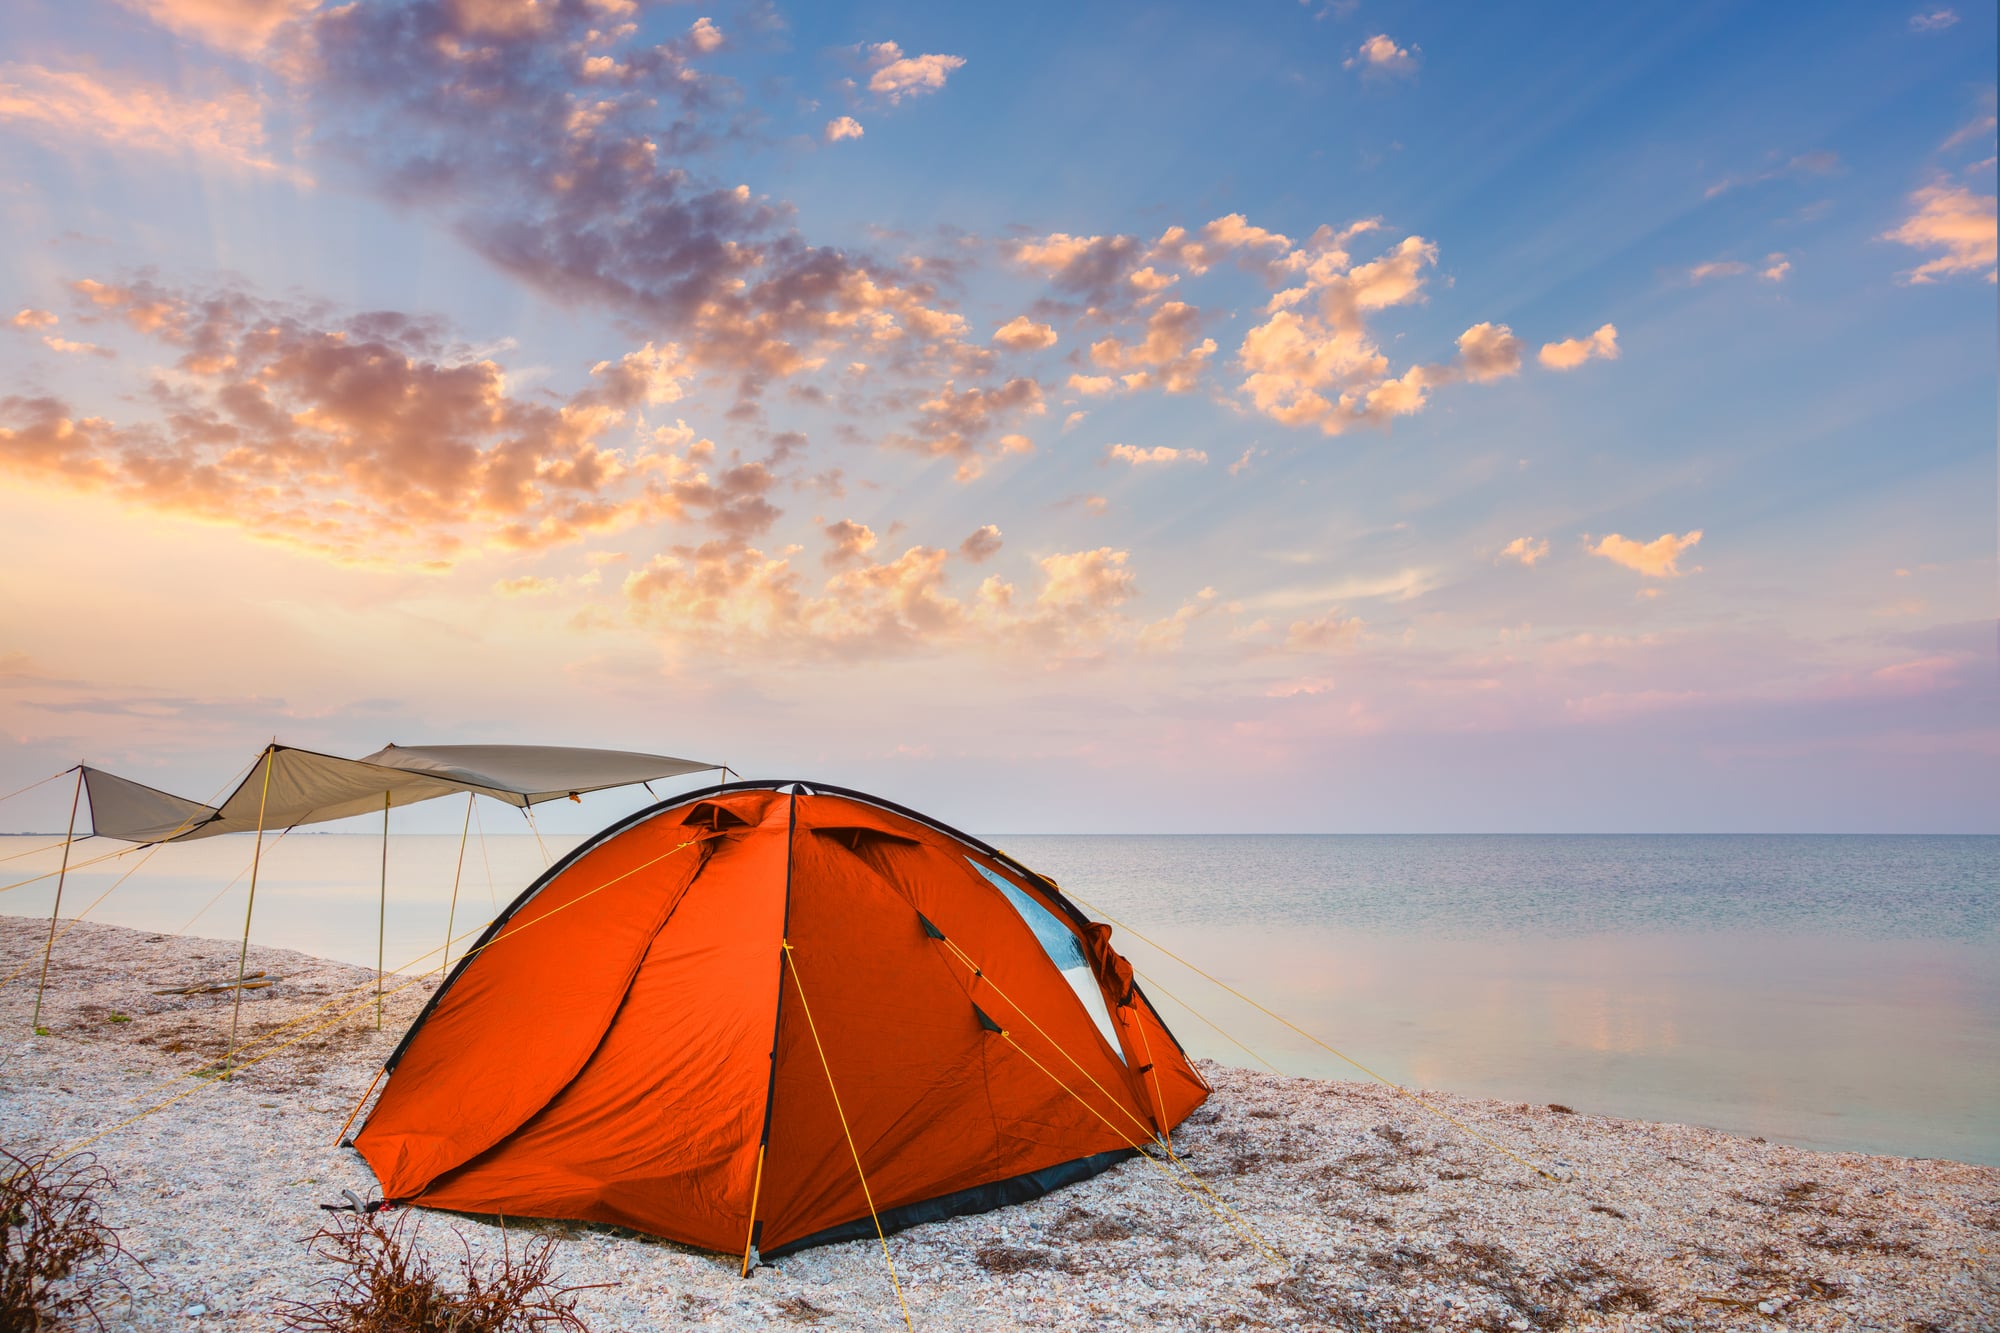 Are you looking for free camping and cheap campsites? Here, you'll see how to find free campsites, cheap camping, free RV camping, and free campgrounds.